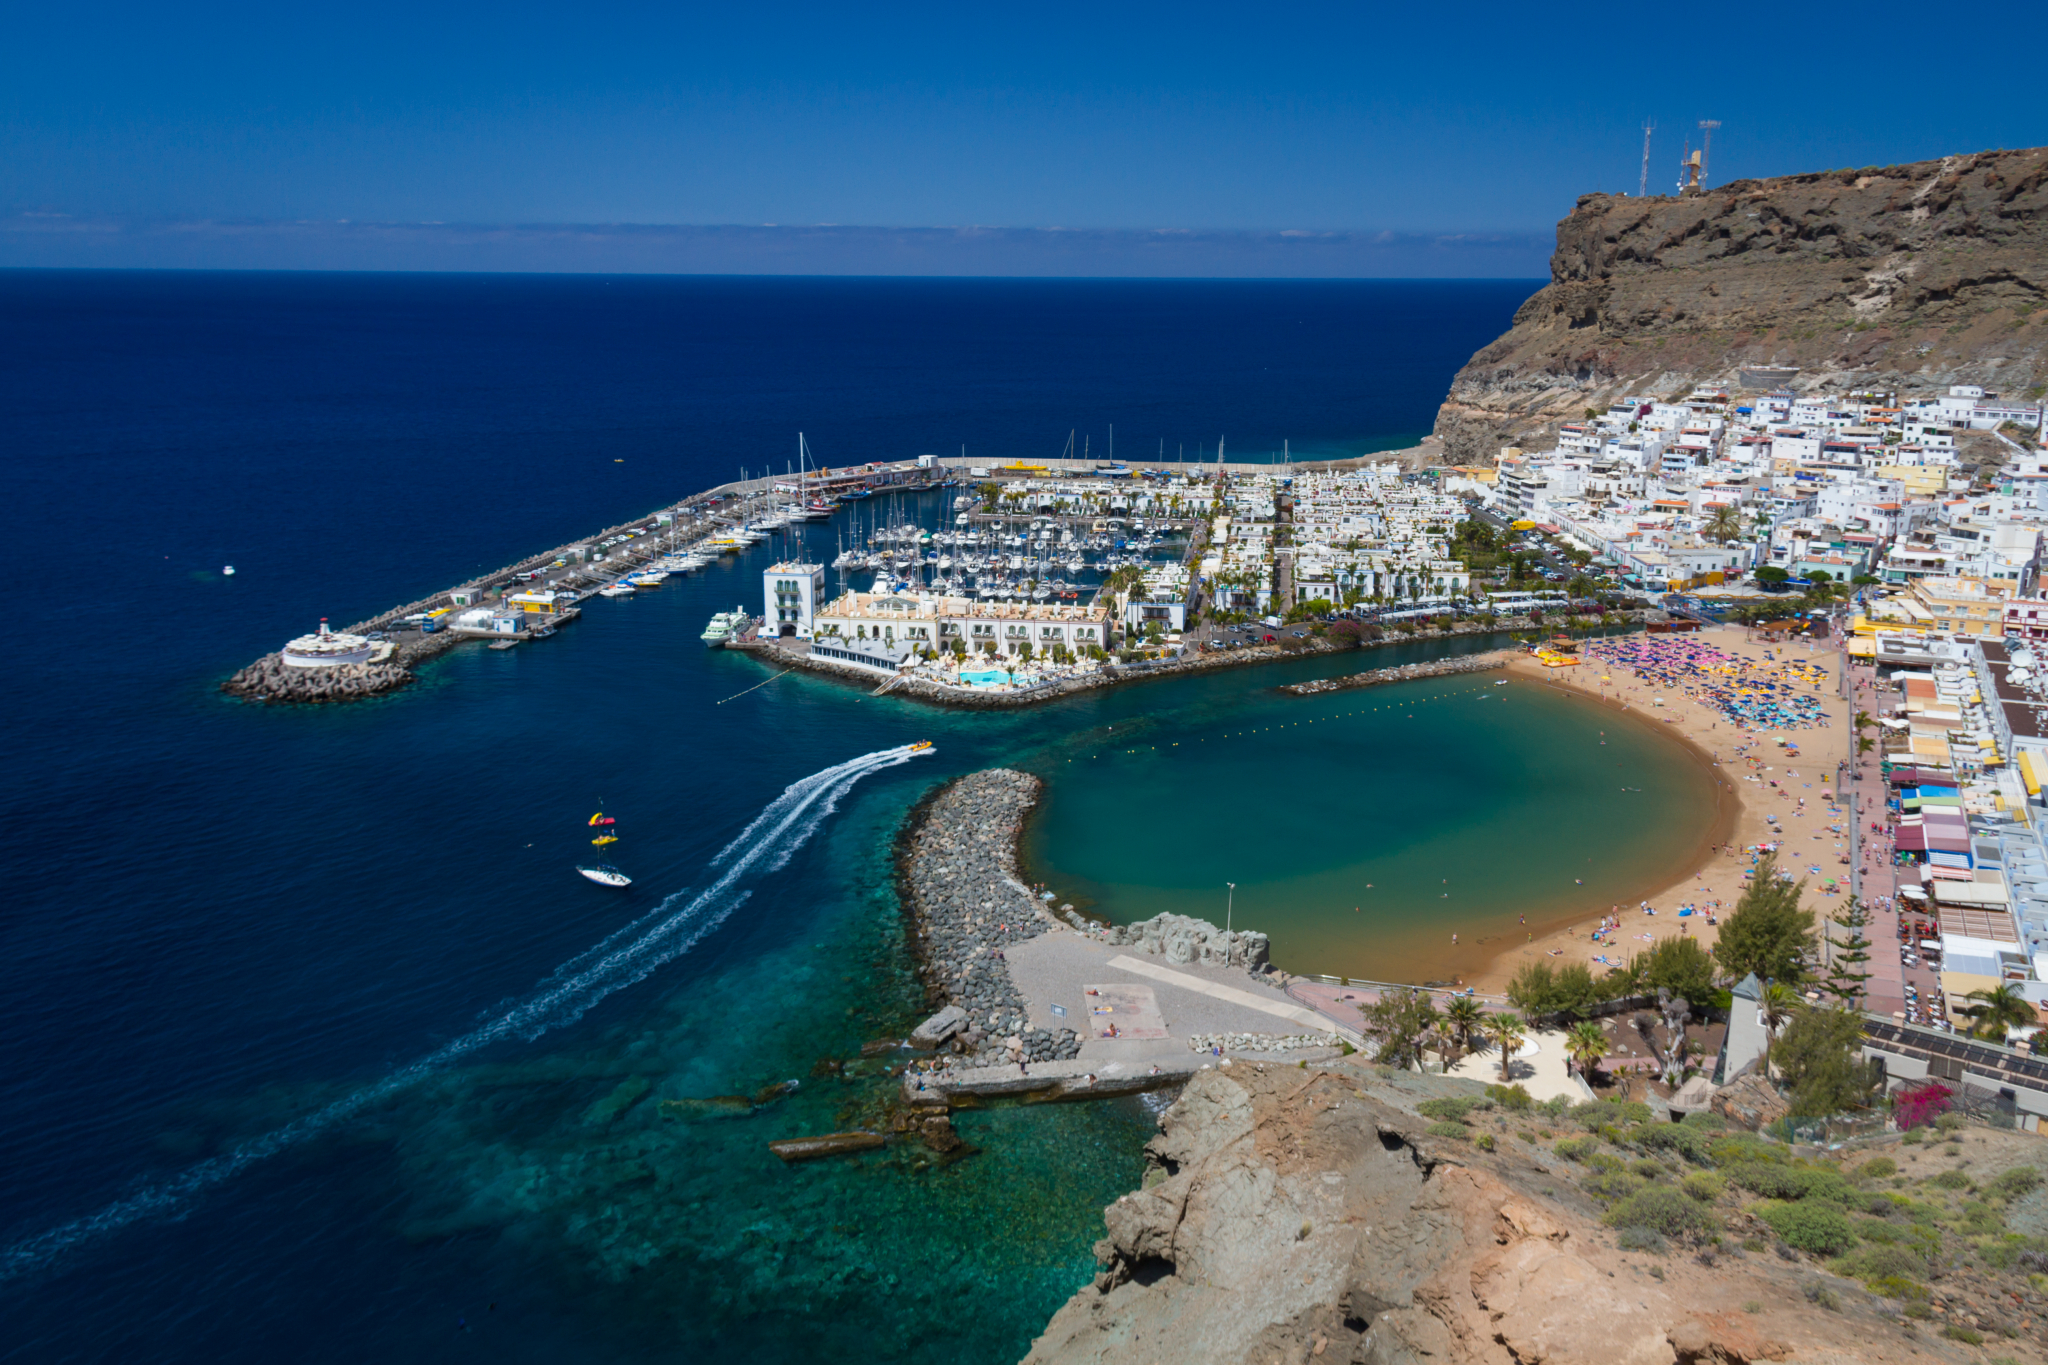 Guide to the sports marinas and harbours of Gran Canaria||||Pasito Blanco marina in south Gran Canaria|Puerto de Mogán marina in south Gran Canaria|Puerto Rico marina in south Gran Canaria